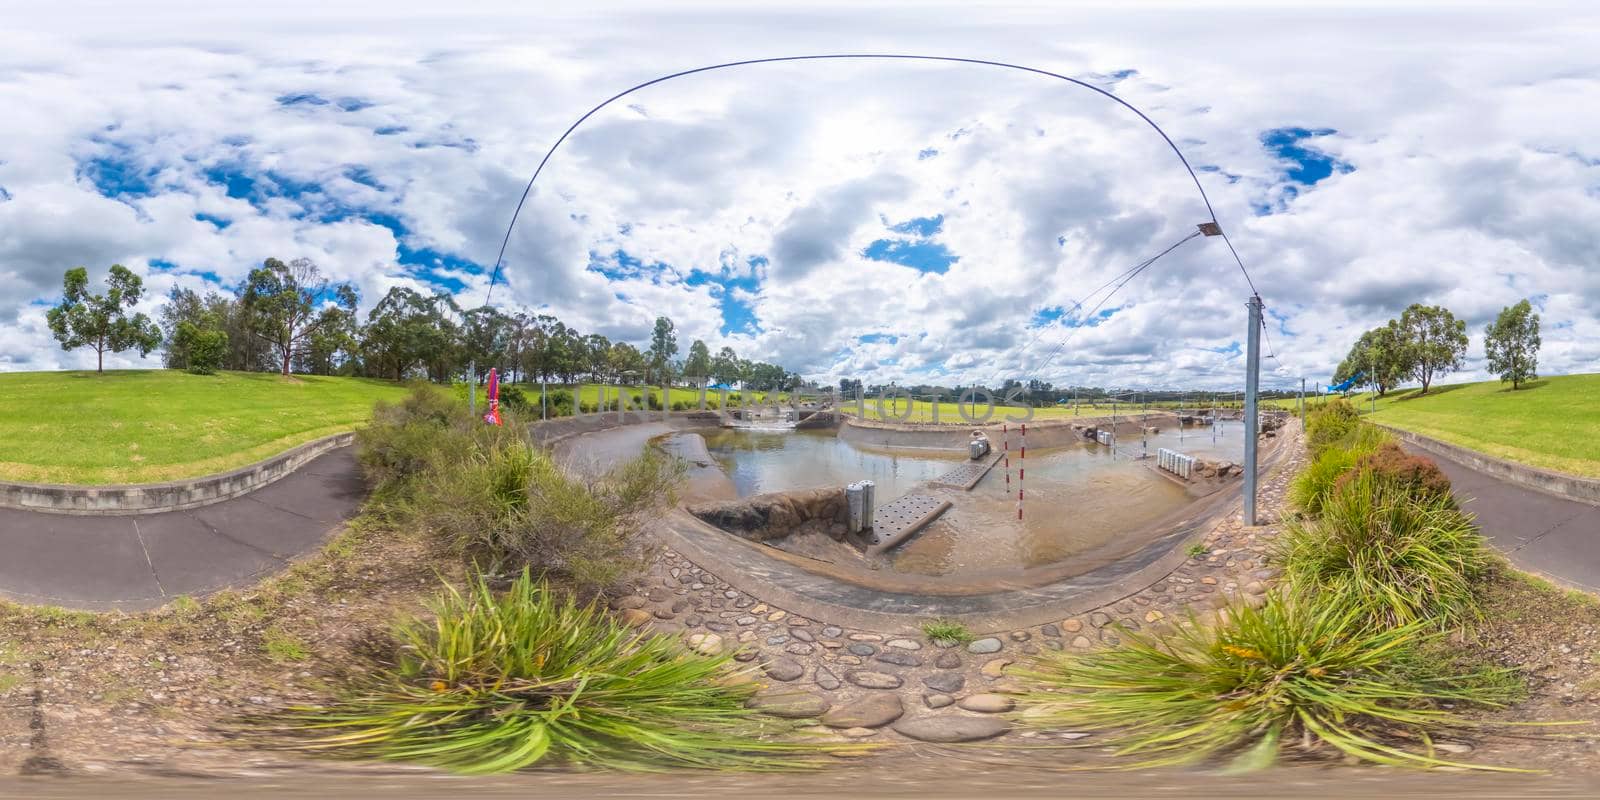 Spherical 360 panorama photograph of the Whitewater Stadium in Penrith by WittkePhotos